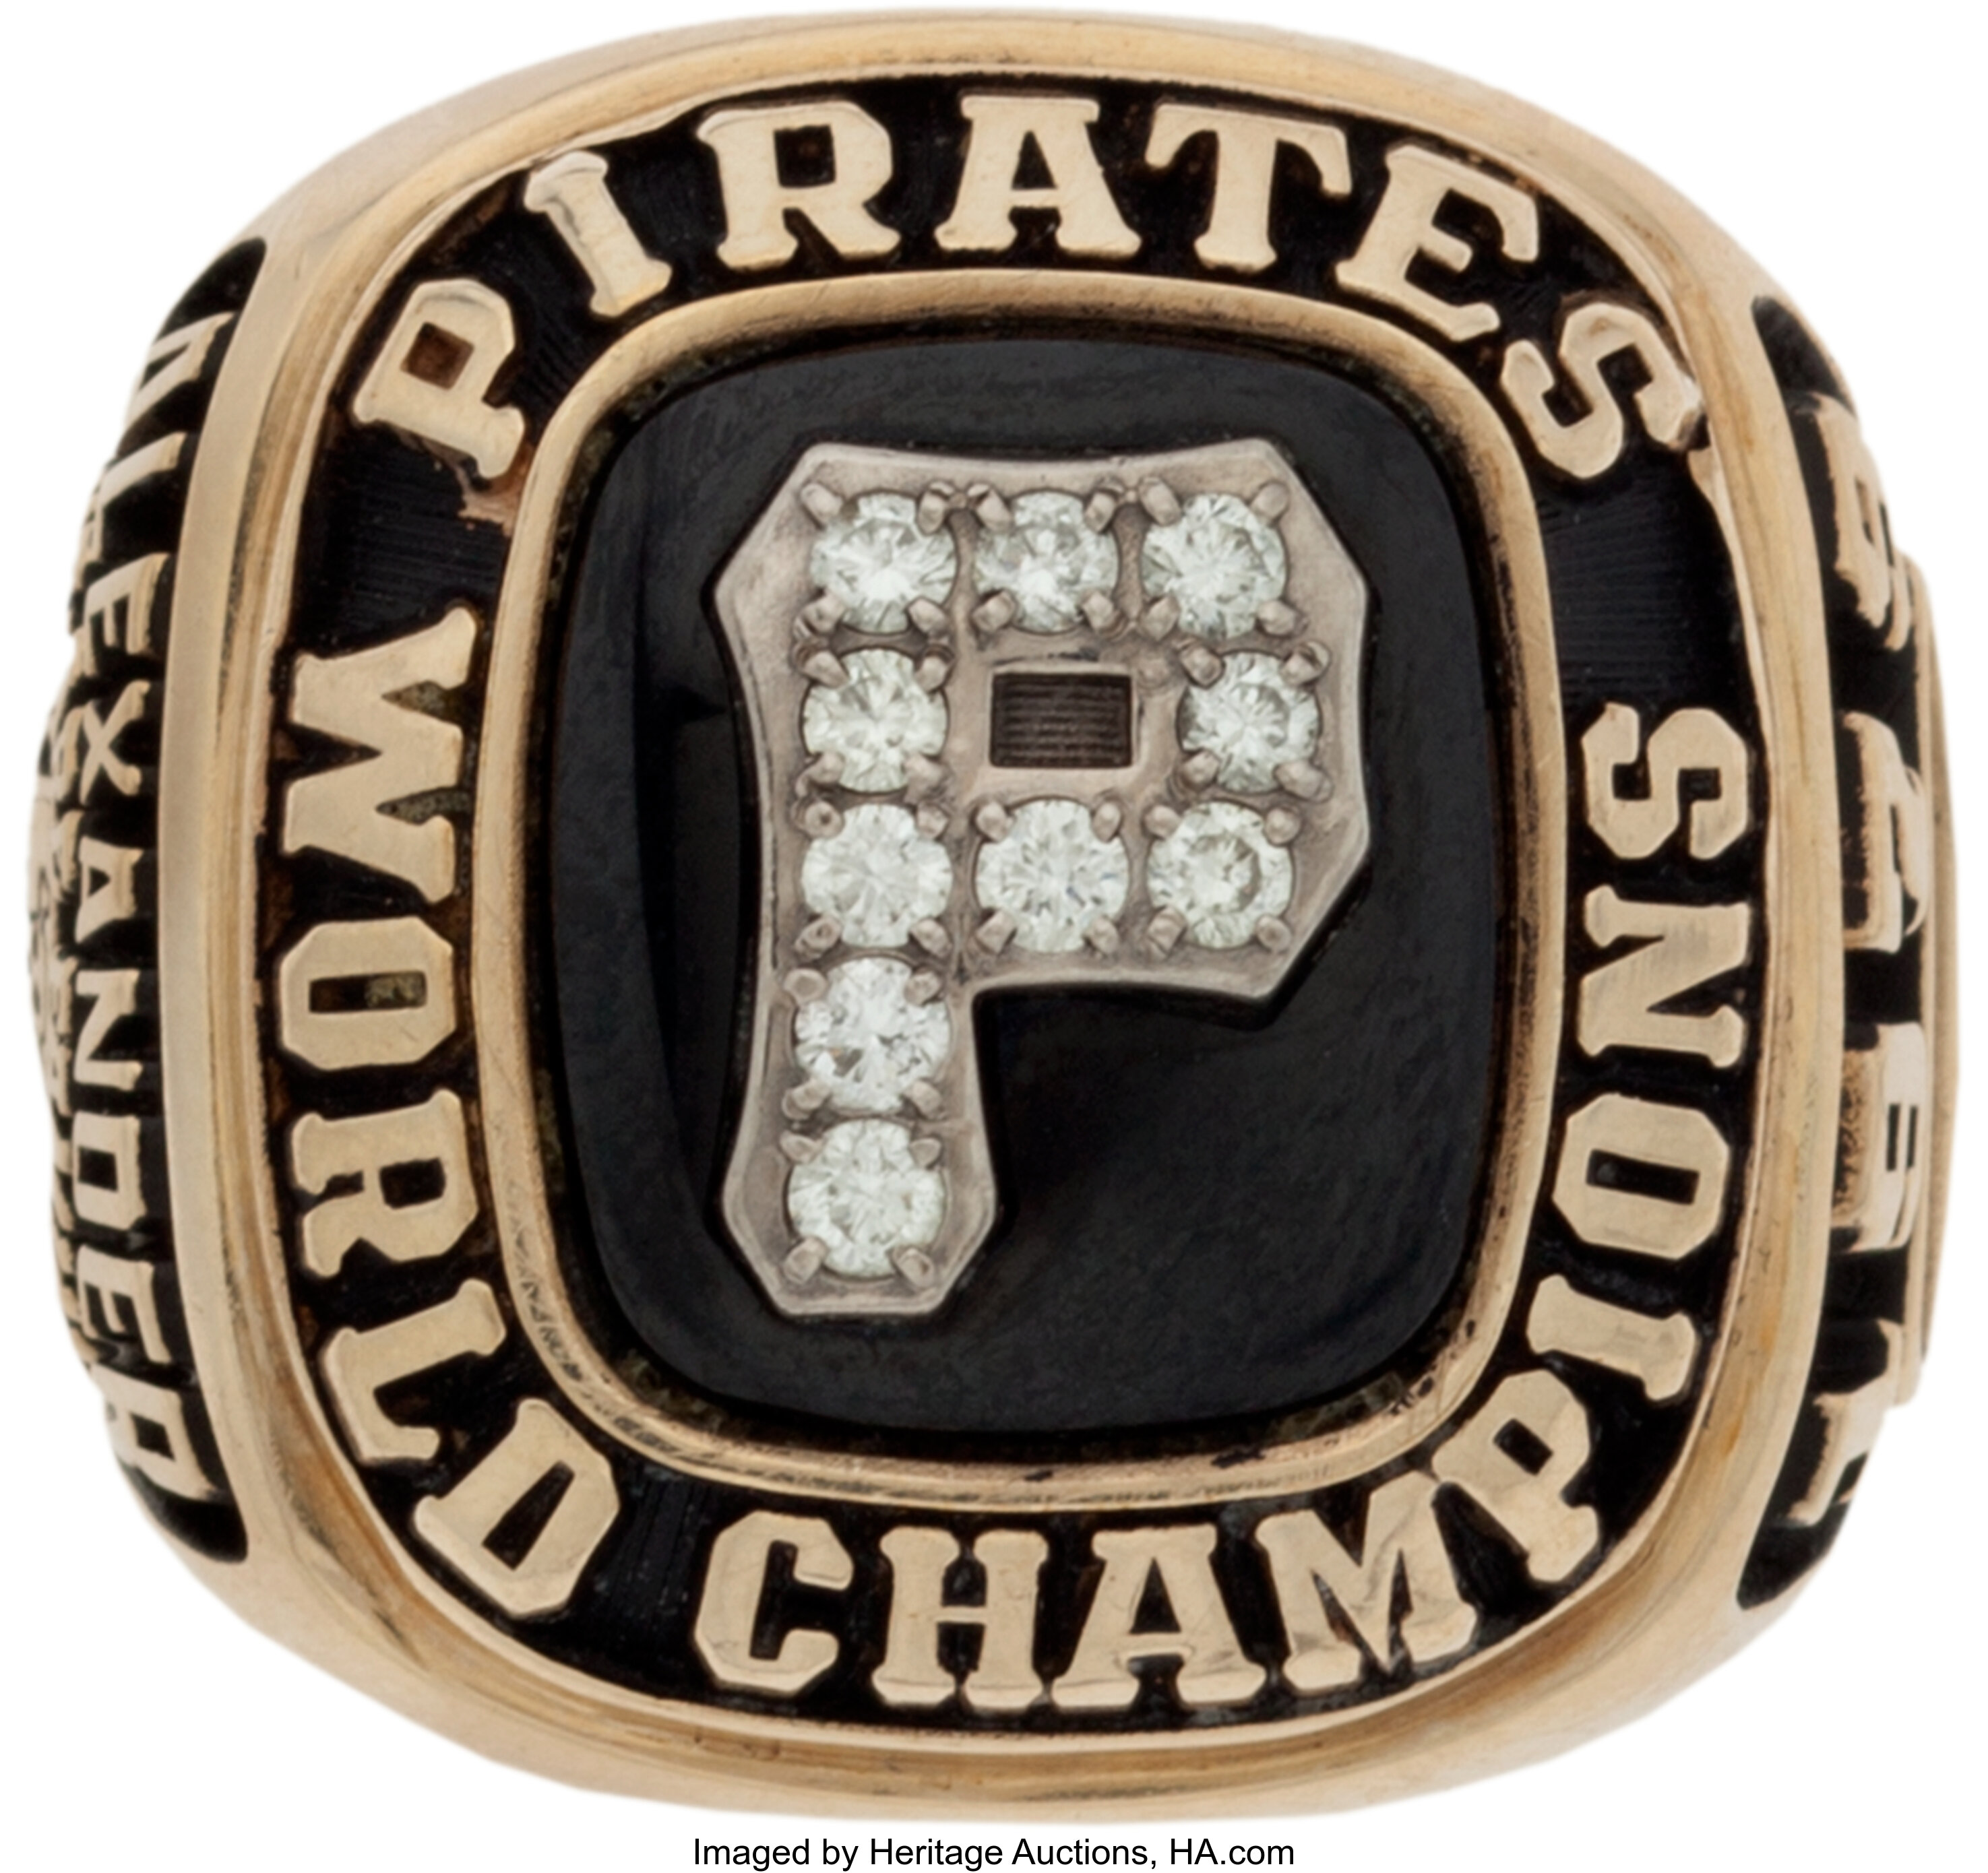 Pittsburgh Pirates 1909 World Series Championship Patch – The